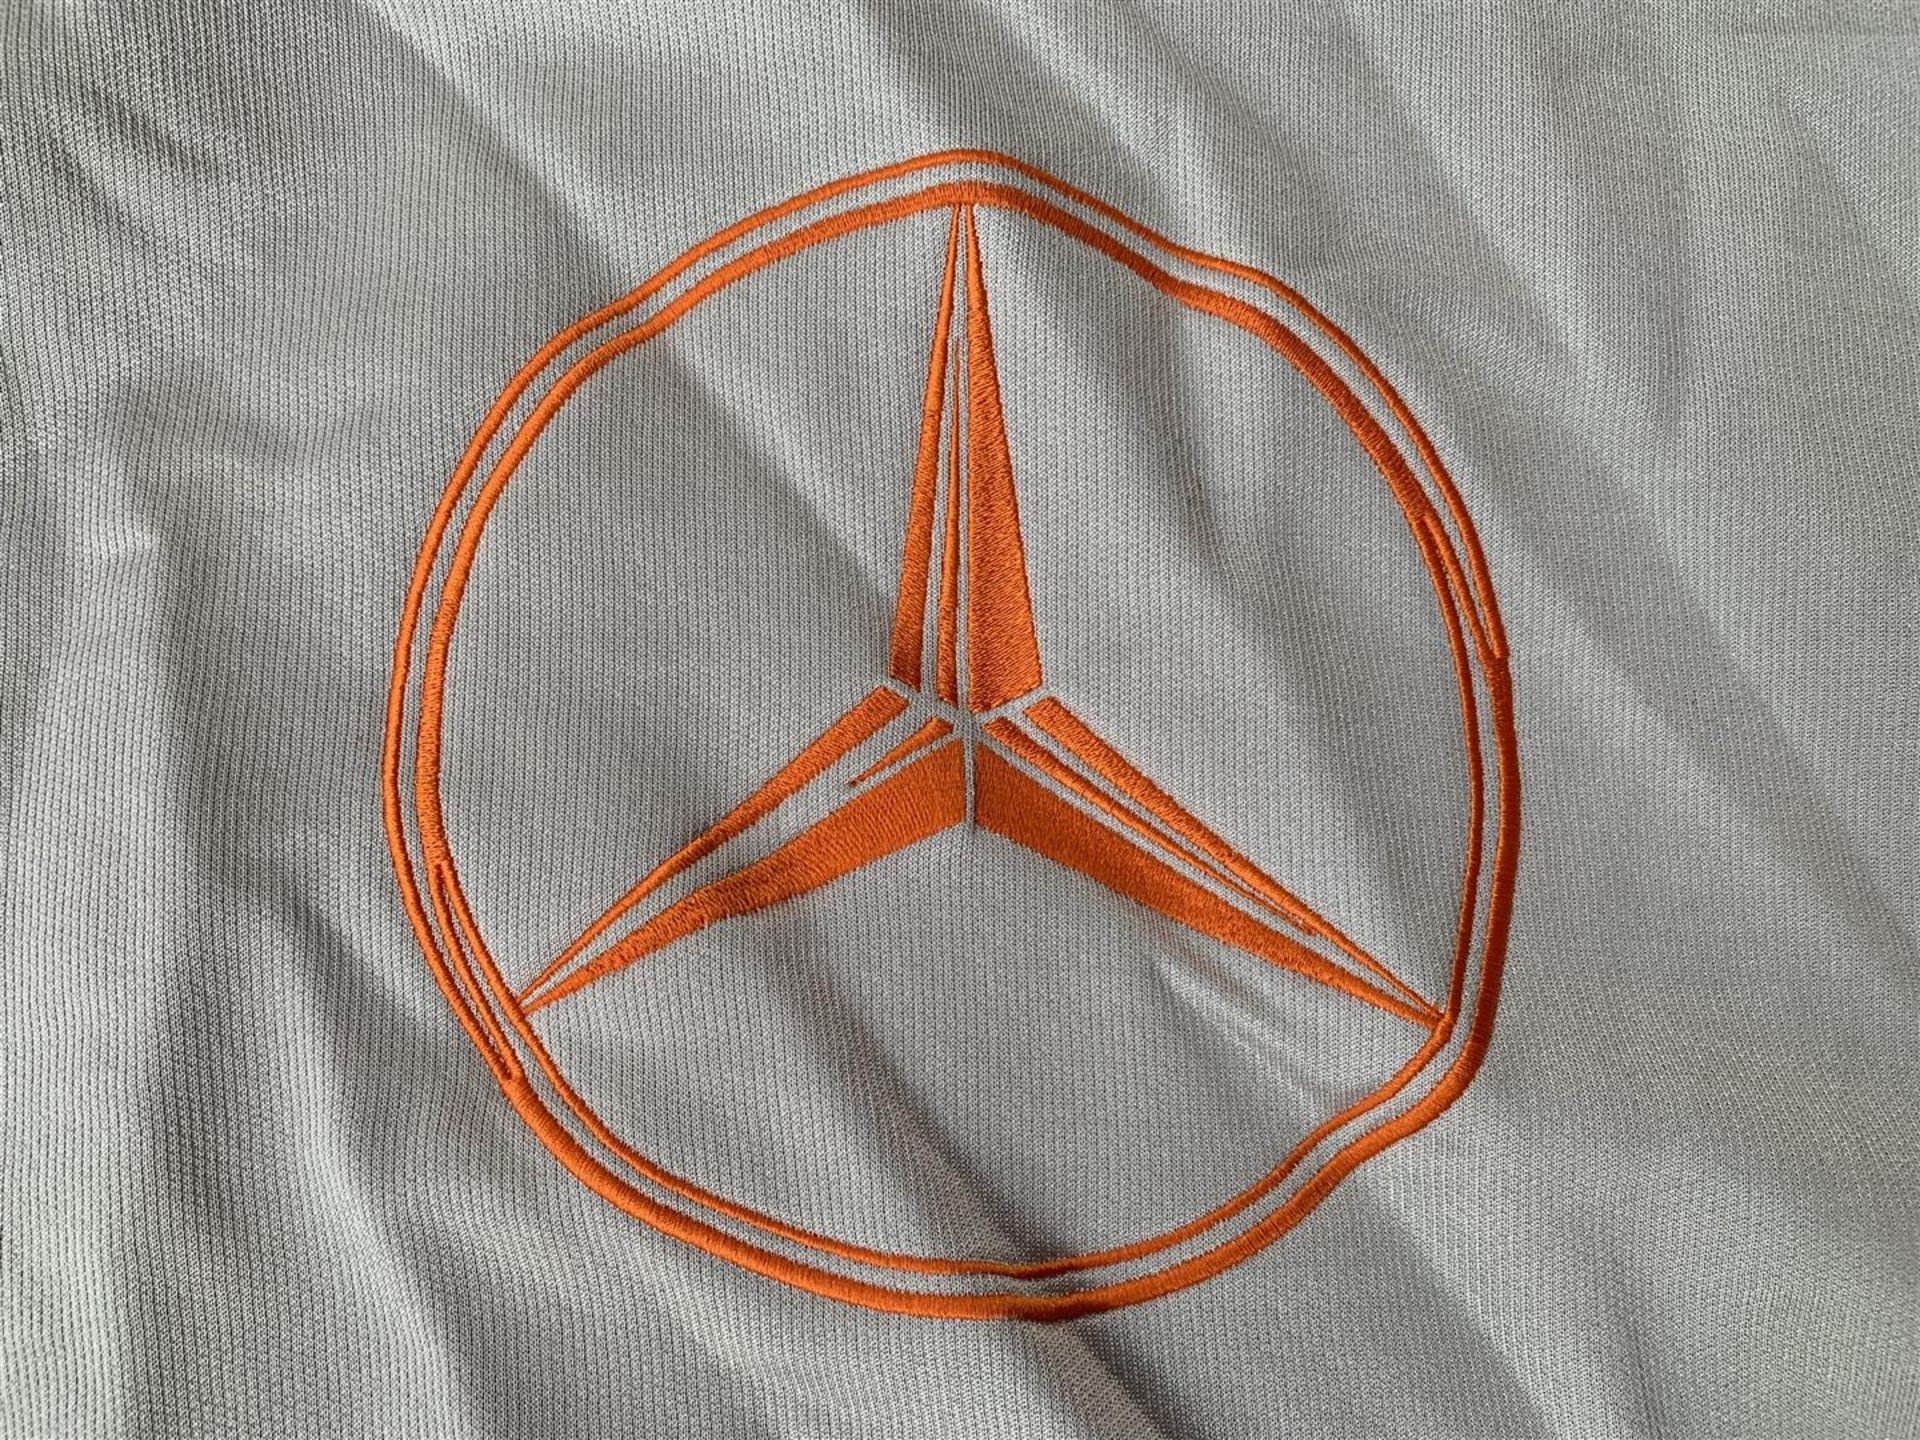 Mercedes R129 SL Embroidered Car Cover - Image 2 of 2